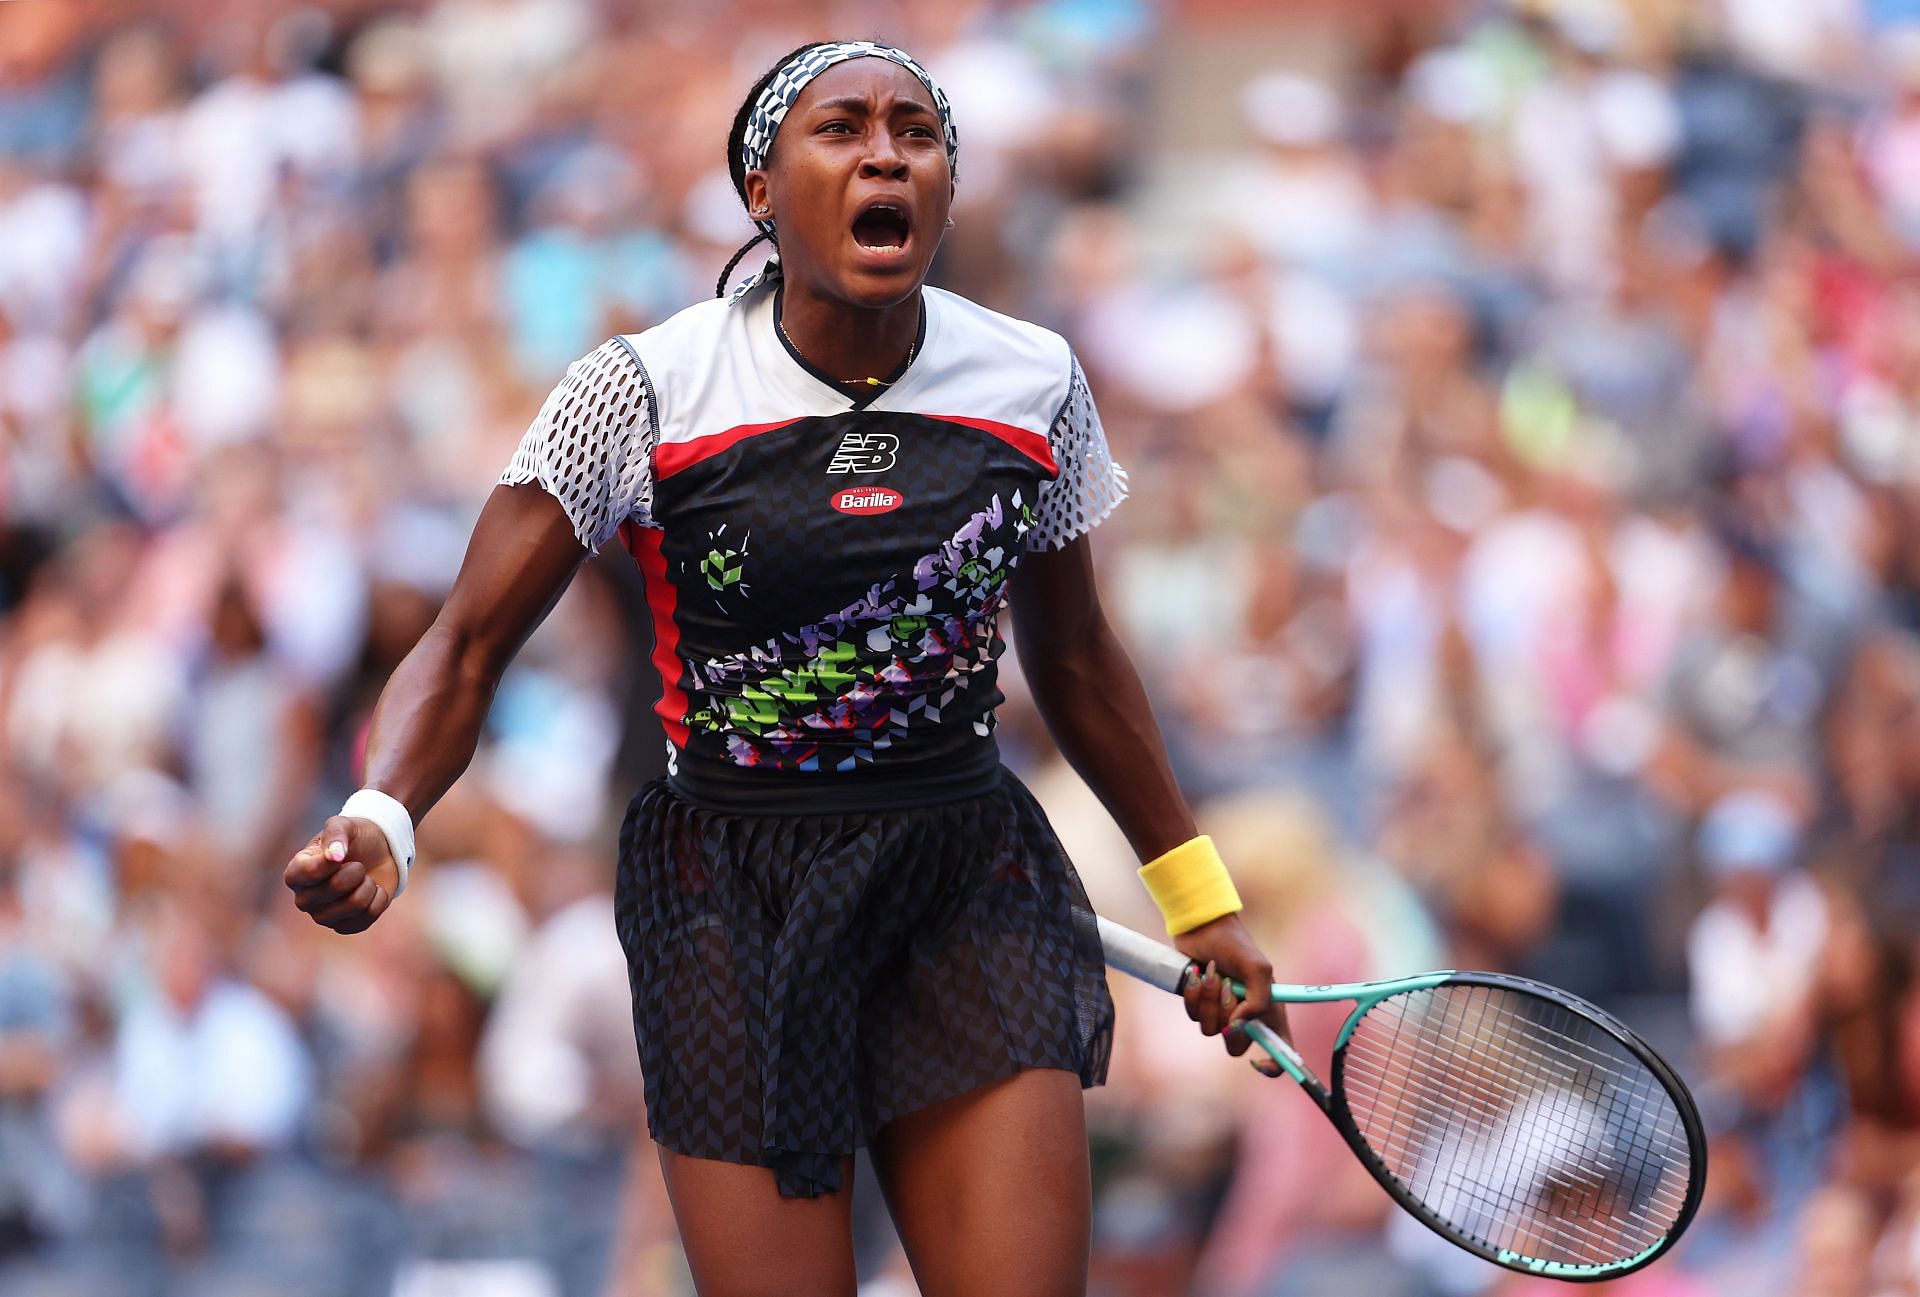 US Open 2022 American players TV schedule today When are Coco Gauff, Madison Keys and Jack Sock playing?